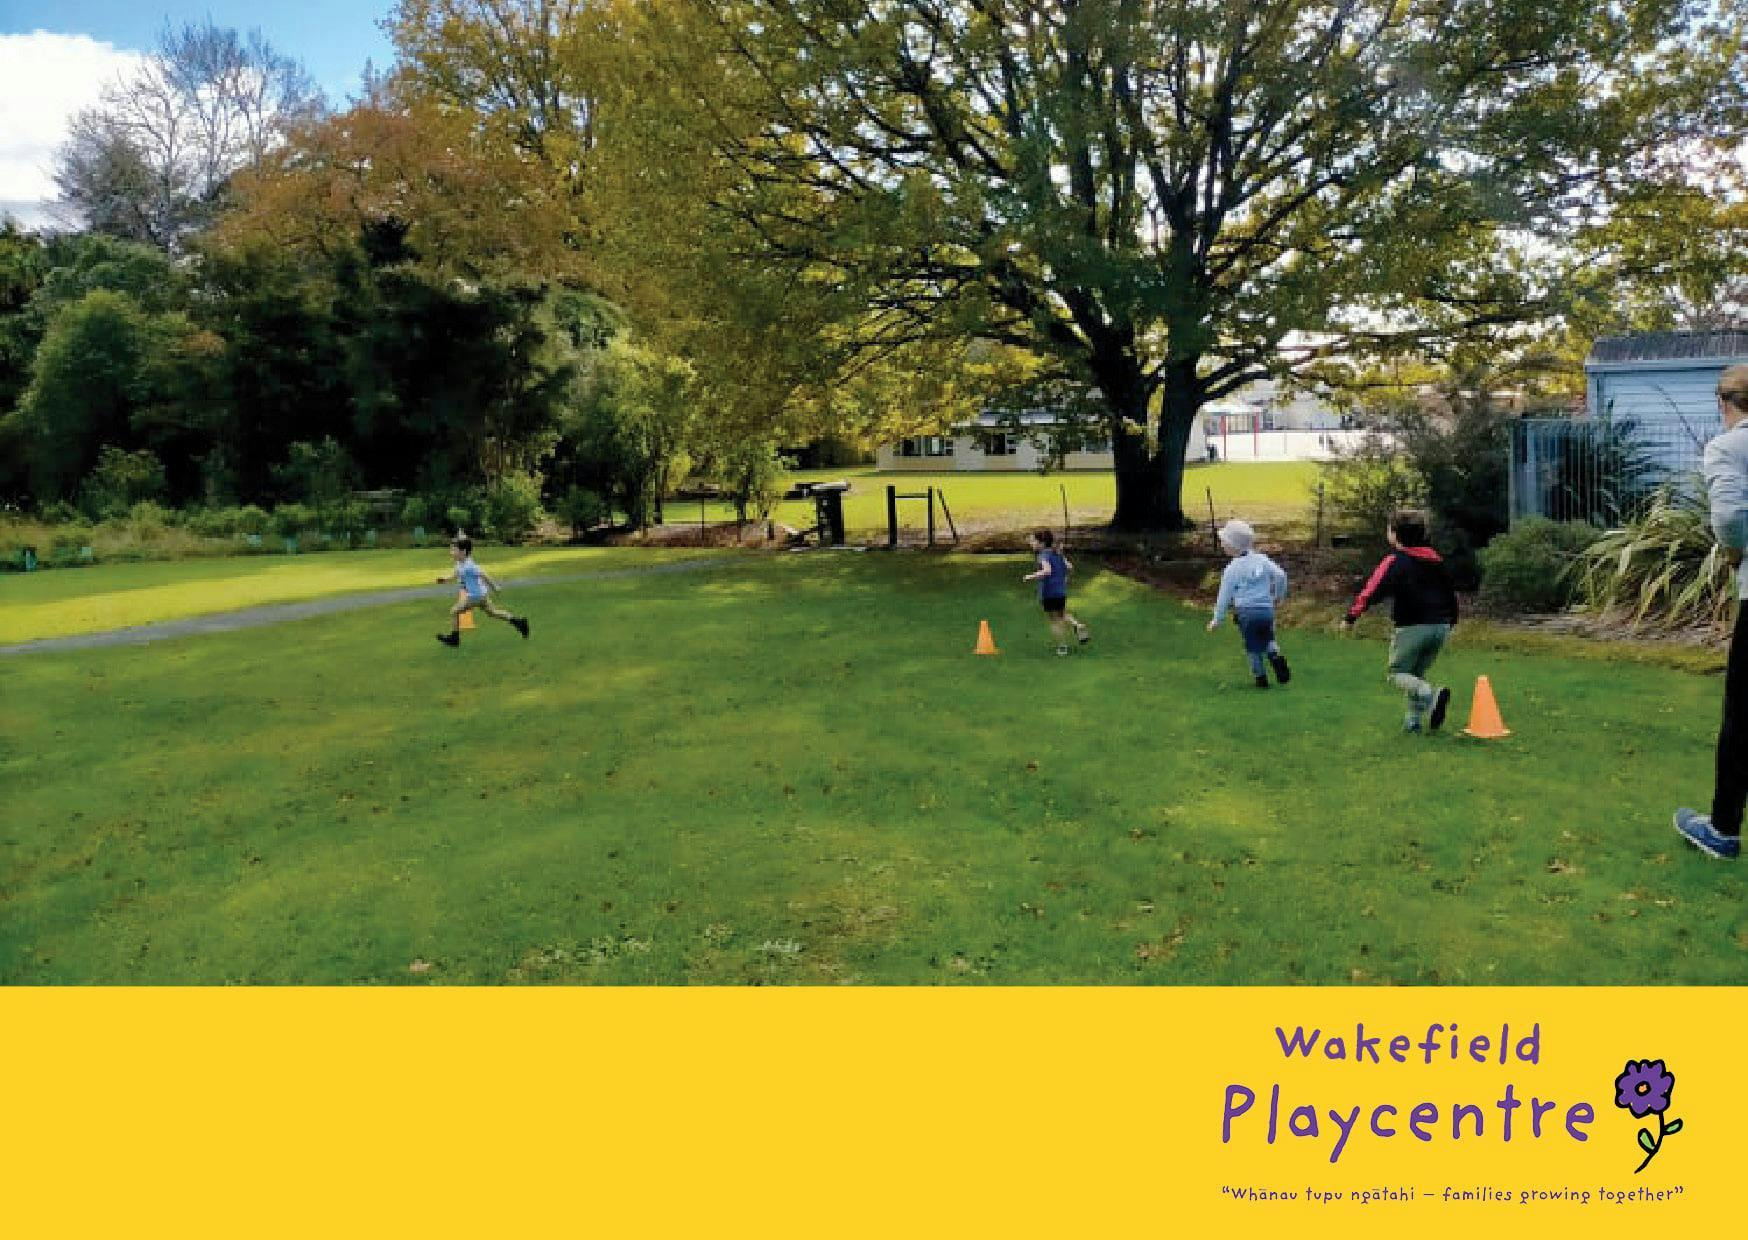 A picture of Wakefield Playcentre